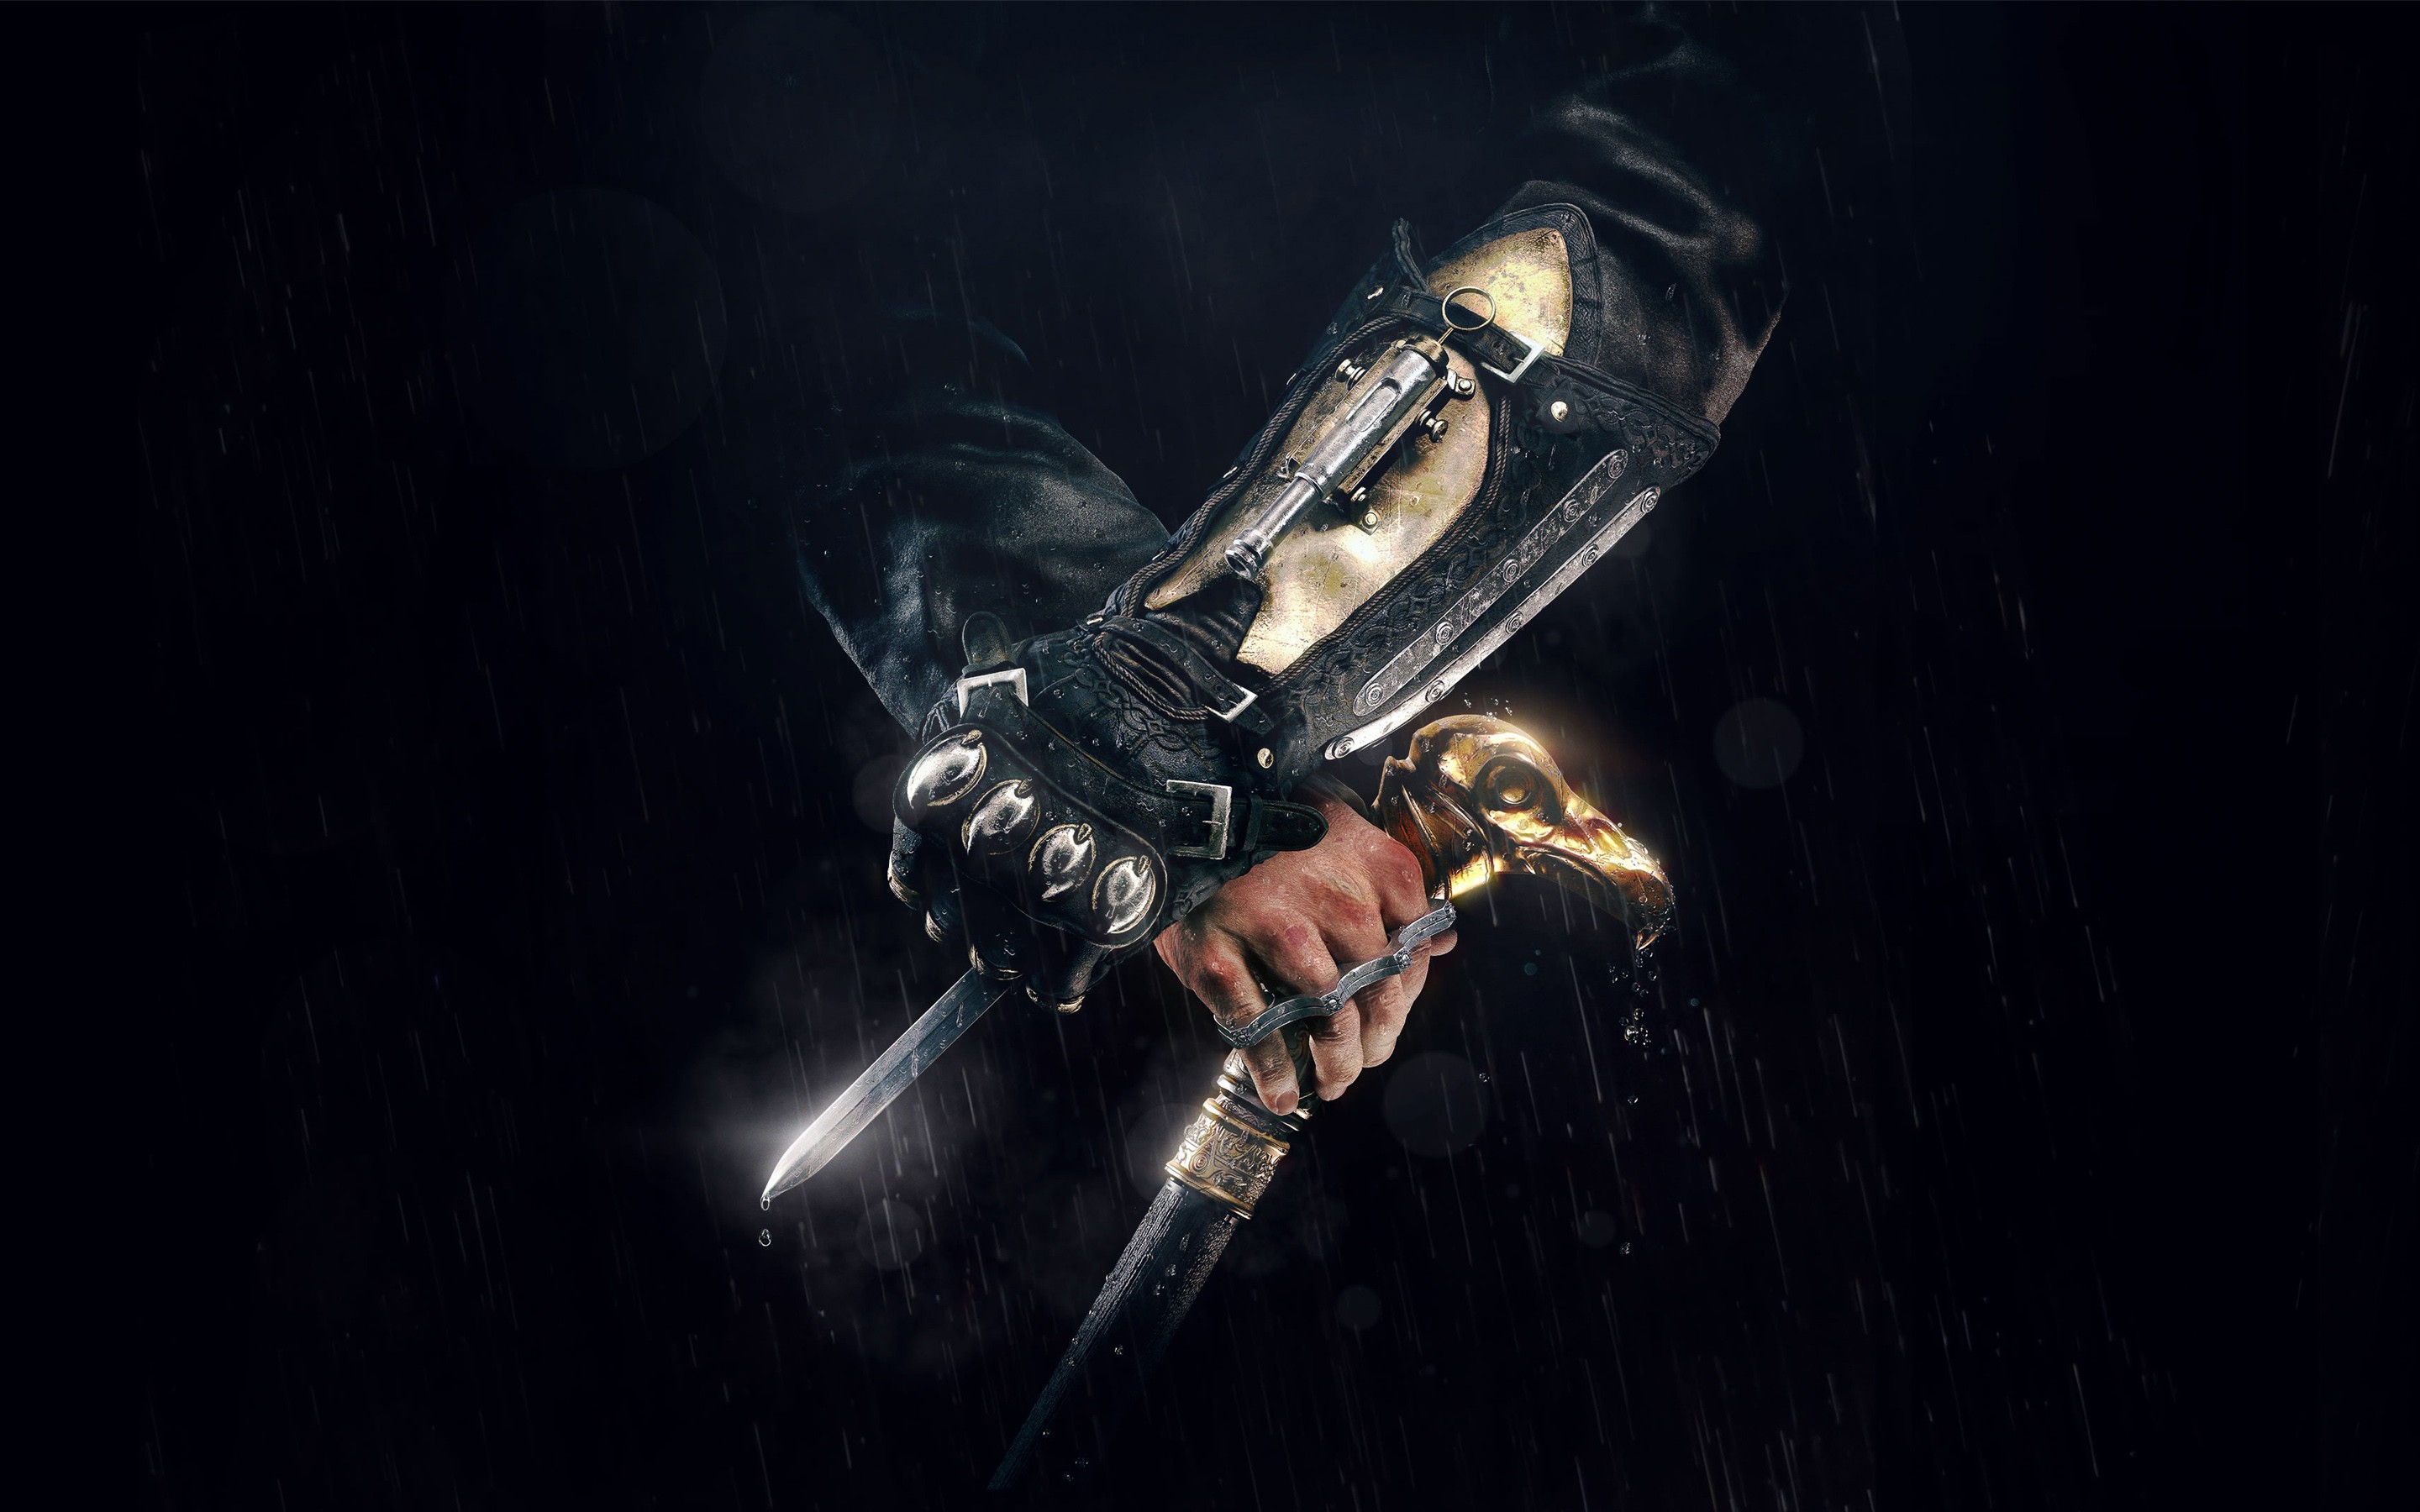 General 2880x1800 Assassin's Creed Syndicate video games video game art PC gaming Ubisoft